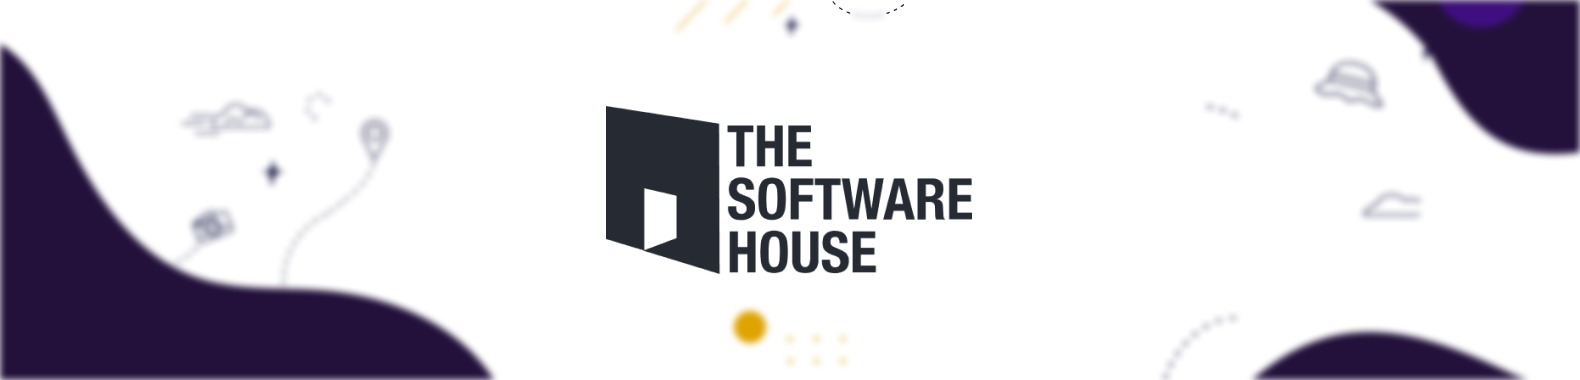 THE SOFTWARE HOUSE